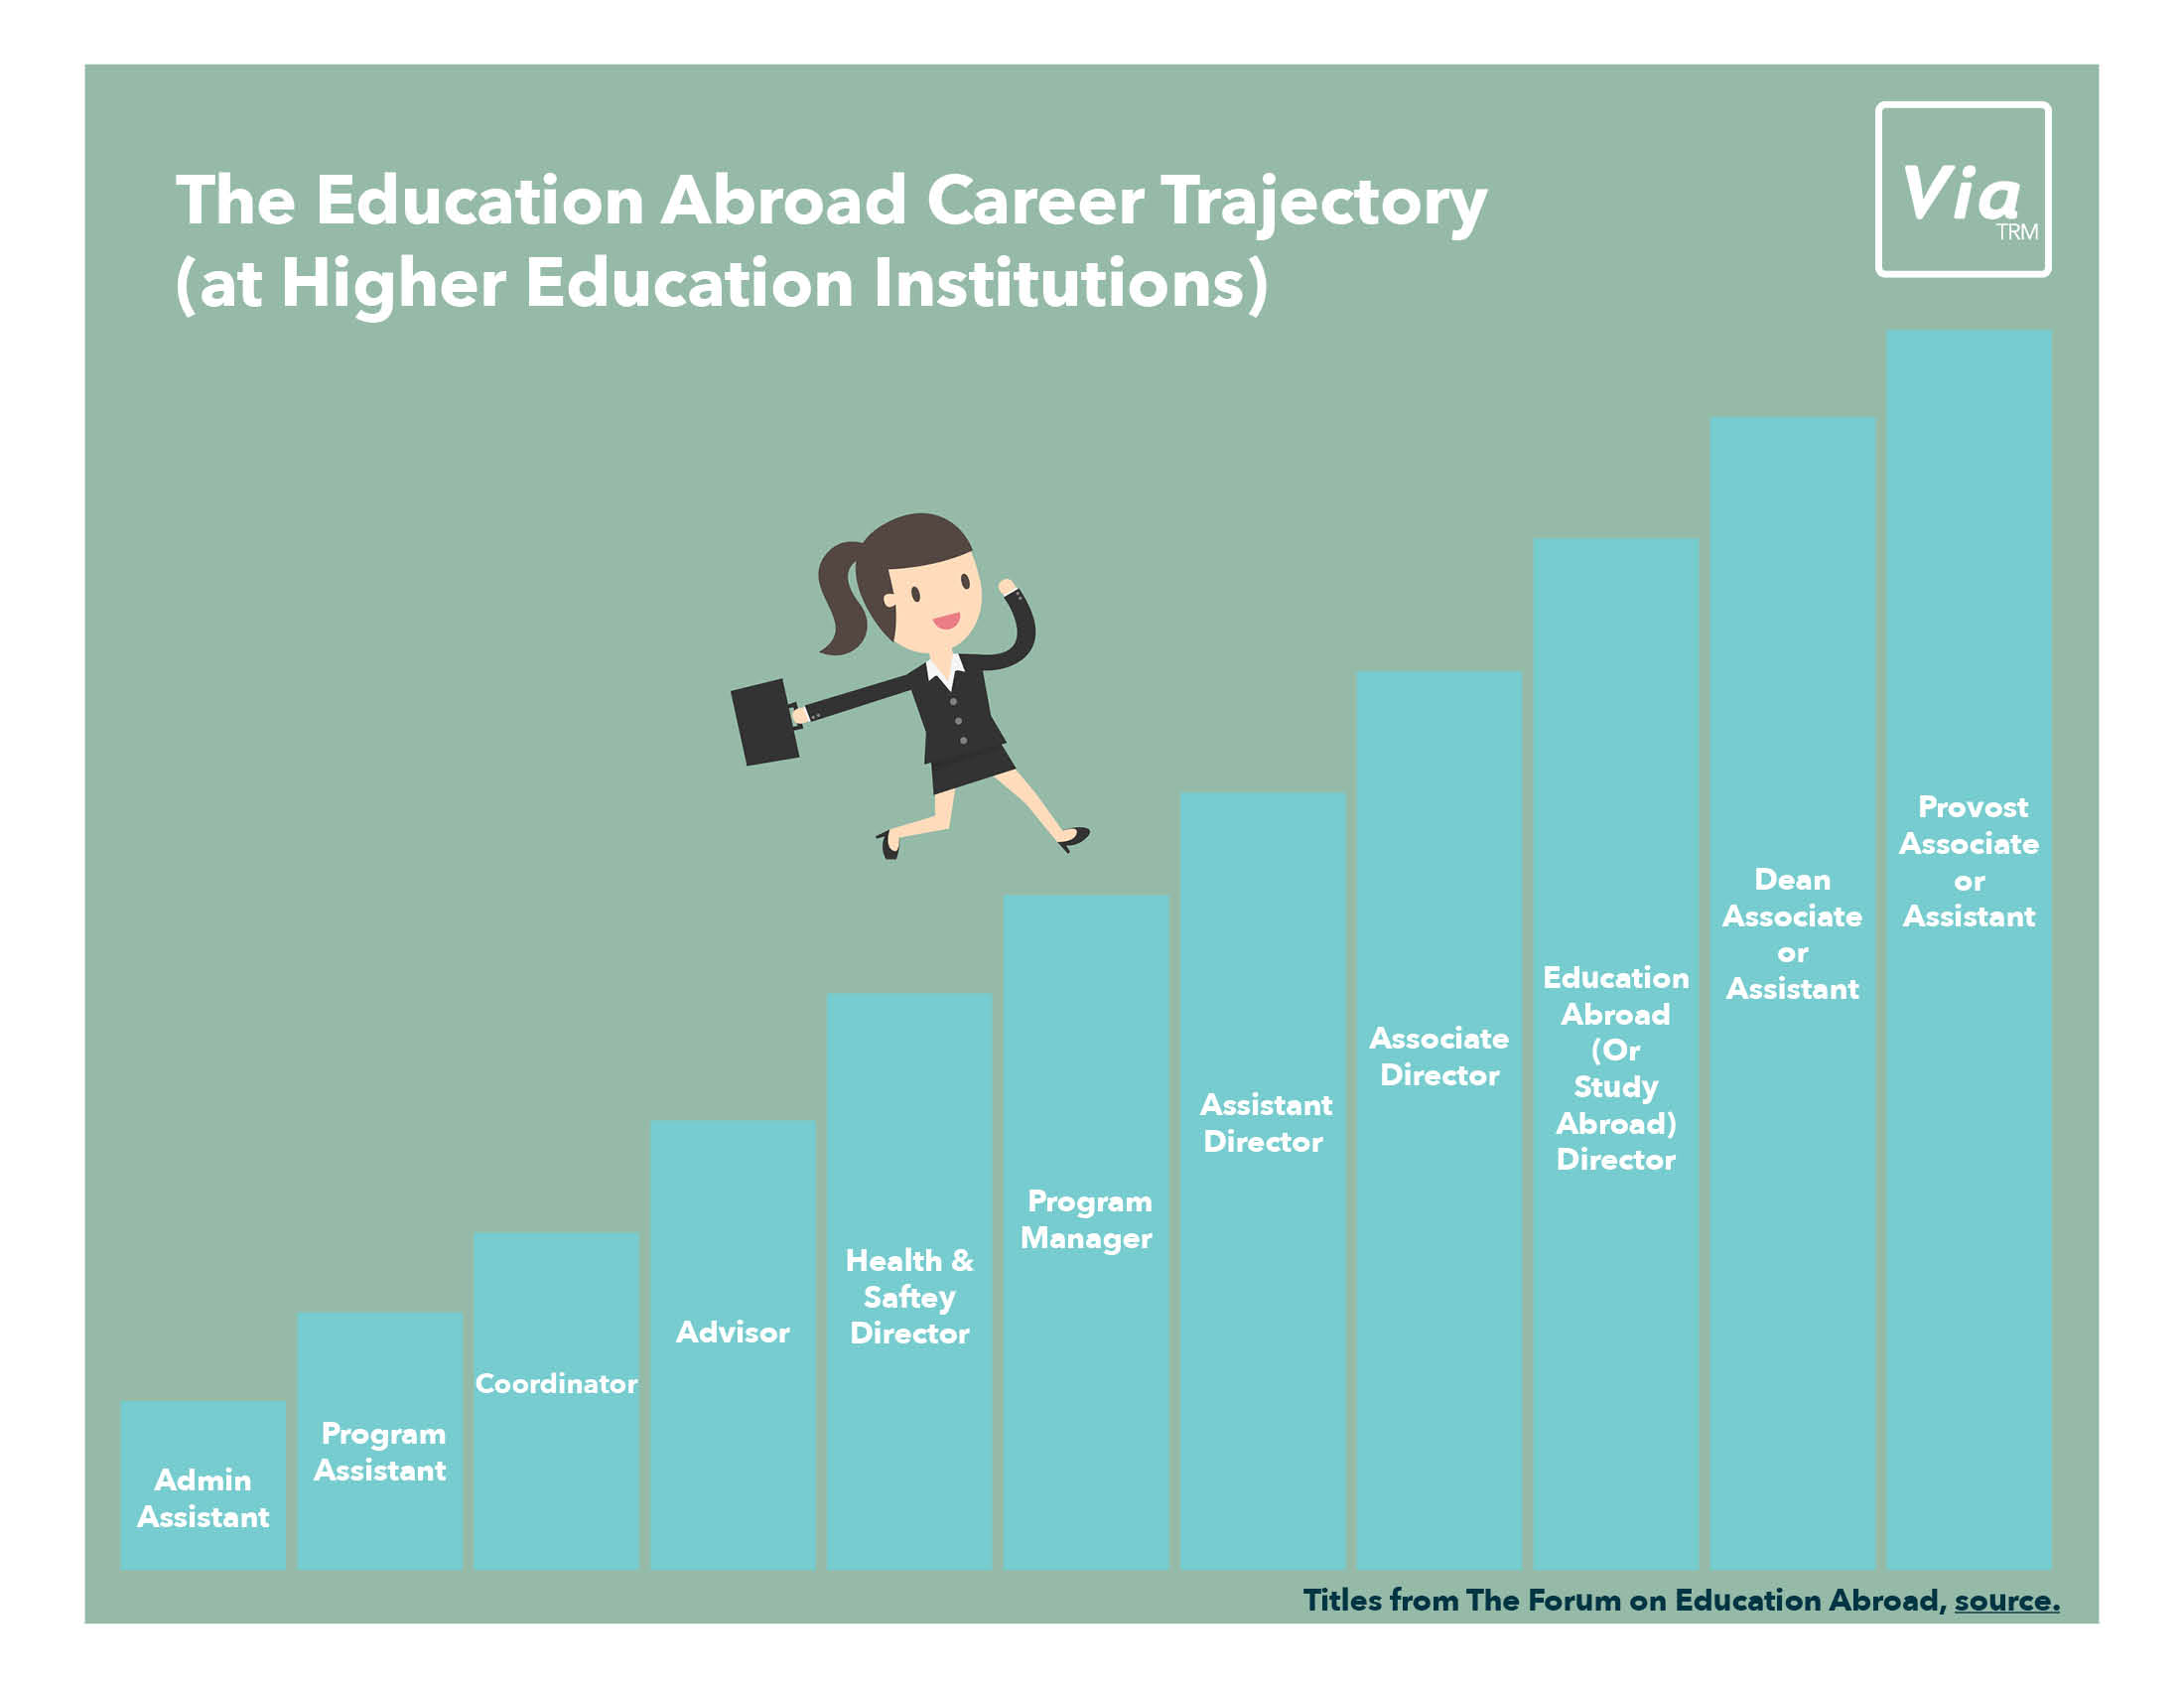 Image of woman walking up ladder with job titles for education abroad roles, from Administrator to Provost. 